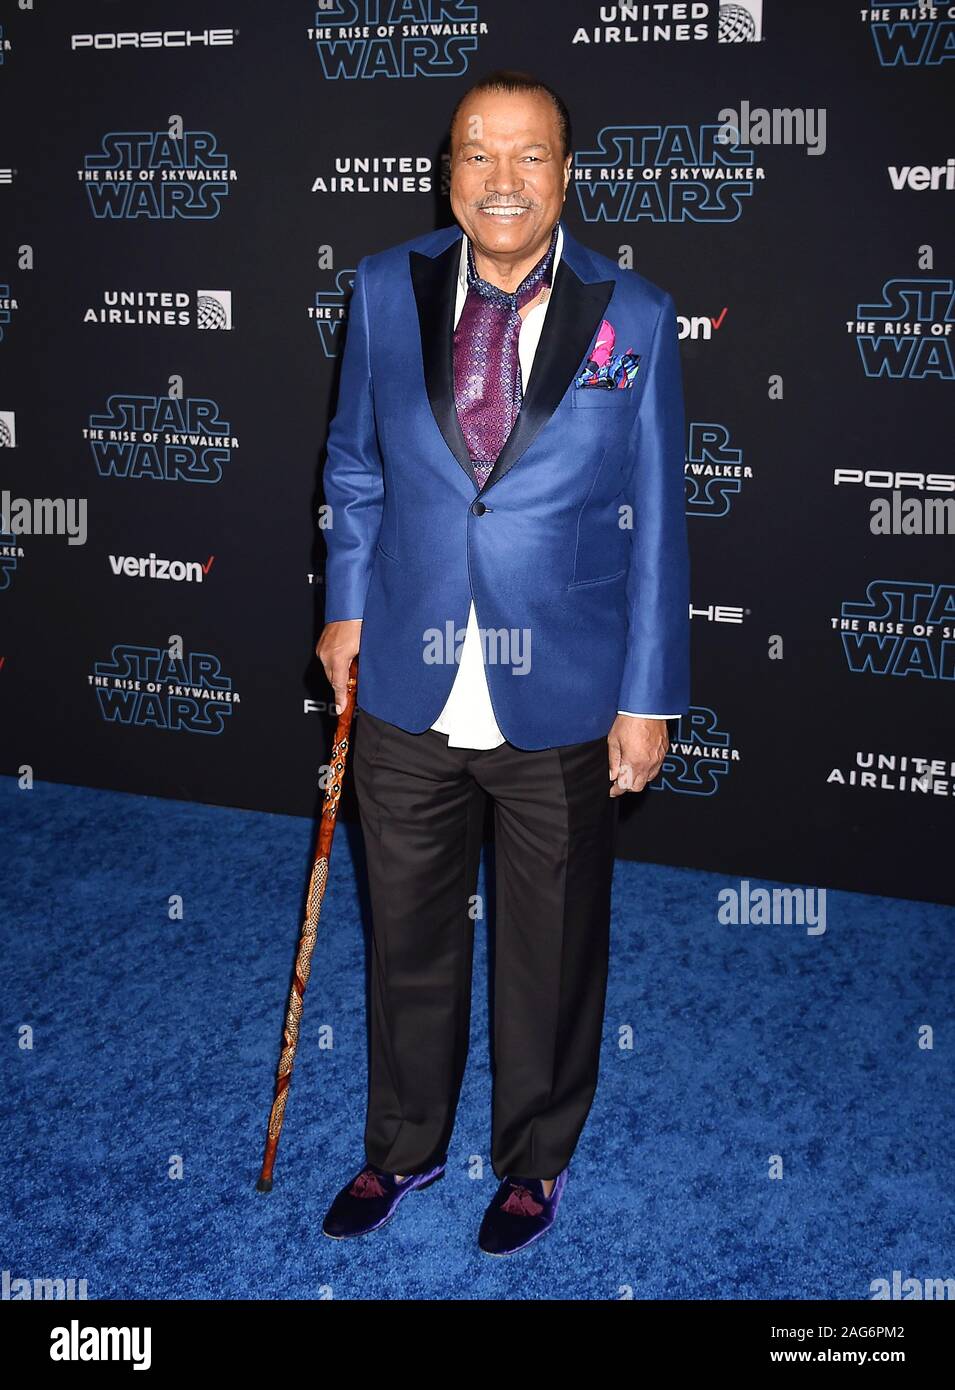 HOLLYWOOD, CA - DECEMBER 16: Billy Dee Williams attends the Premiere of Disney's "Star Wars: The Rise Of Skywalker" at the El Capitan Theatre on December 16, 2019 in Hollywood, California. Stock Photo